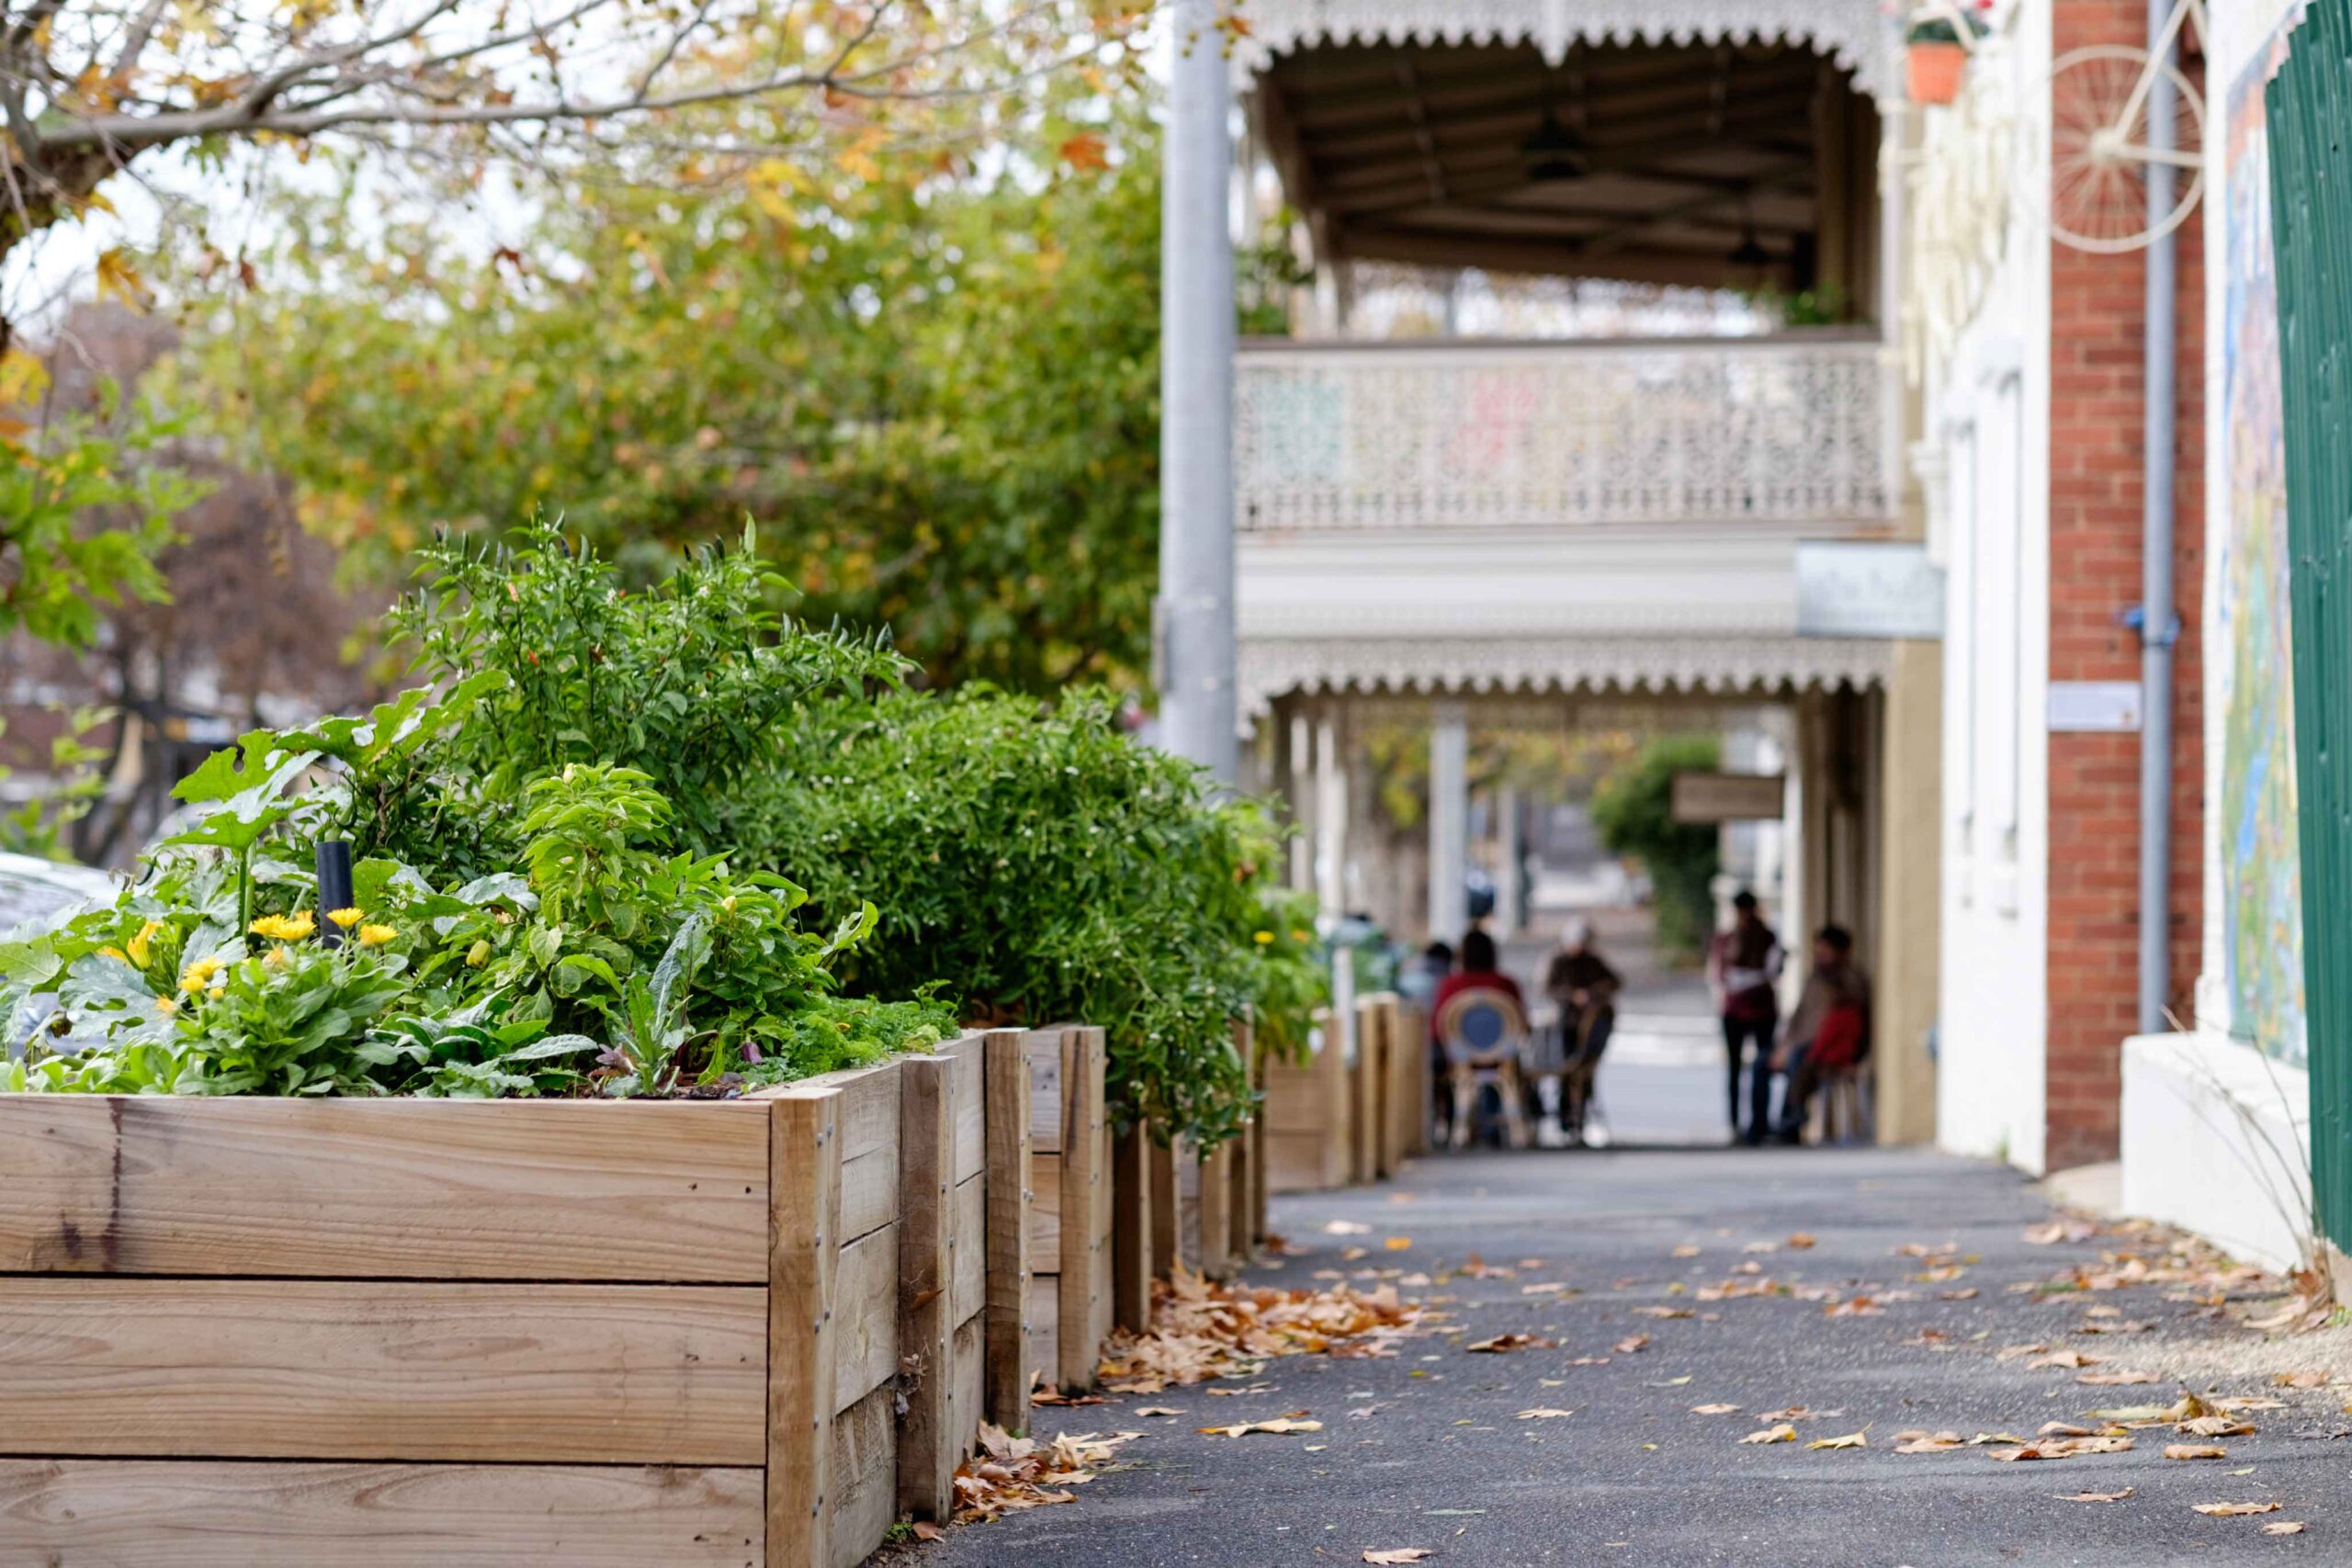 How to set up your own street garden